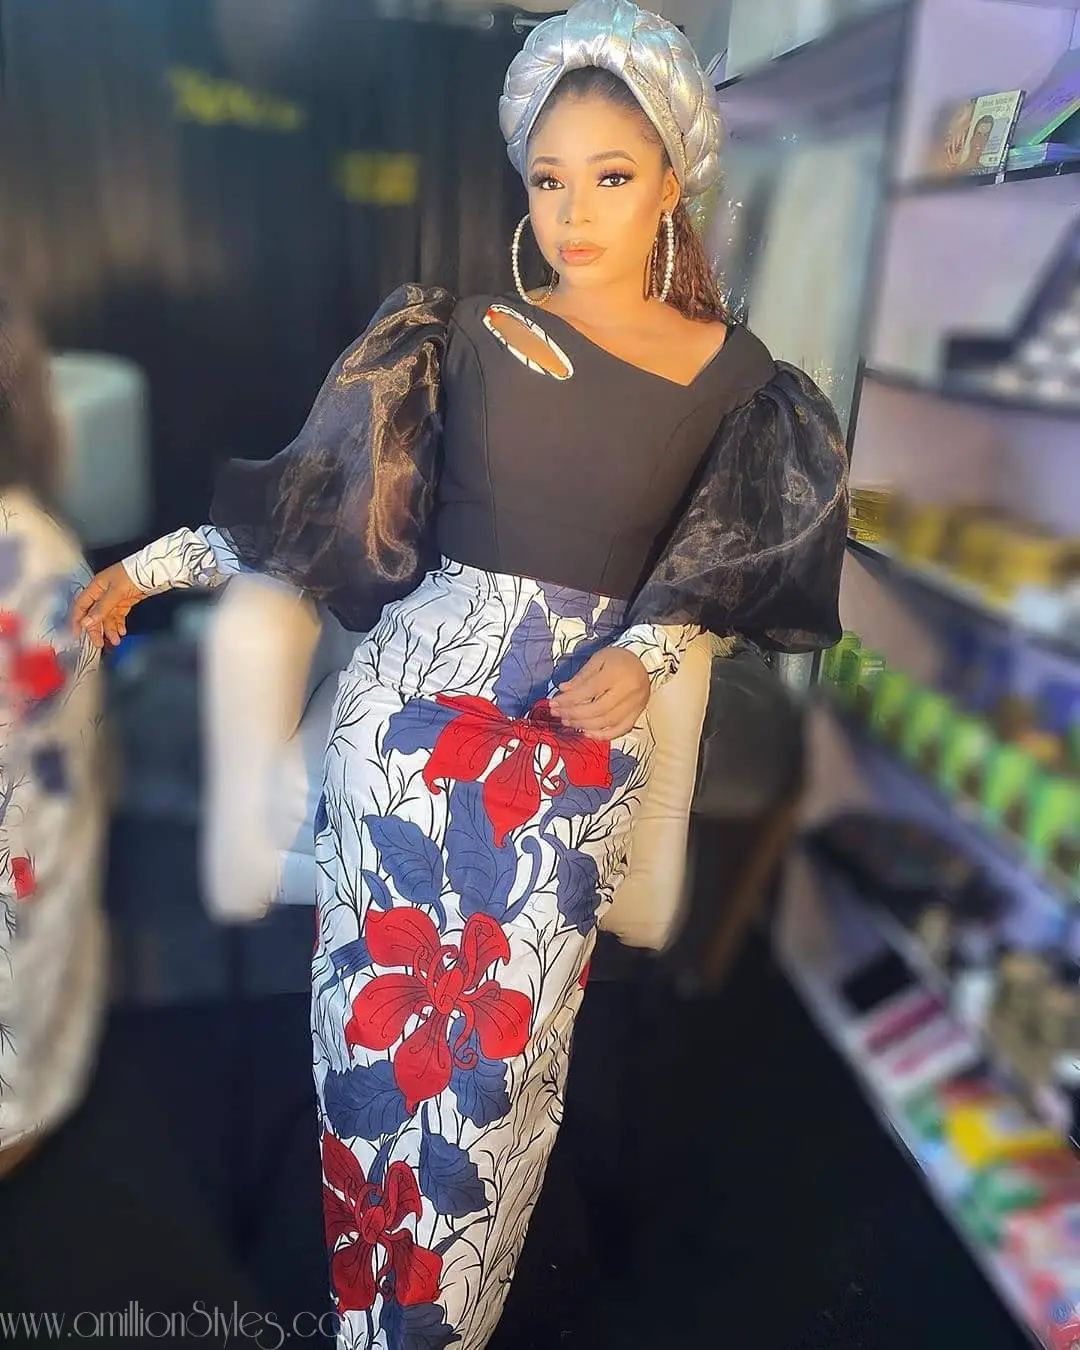 Let's Wrap Up 2019 With The Best 10 Ankara Styles